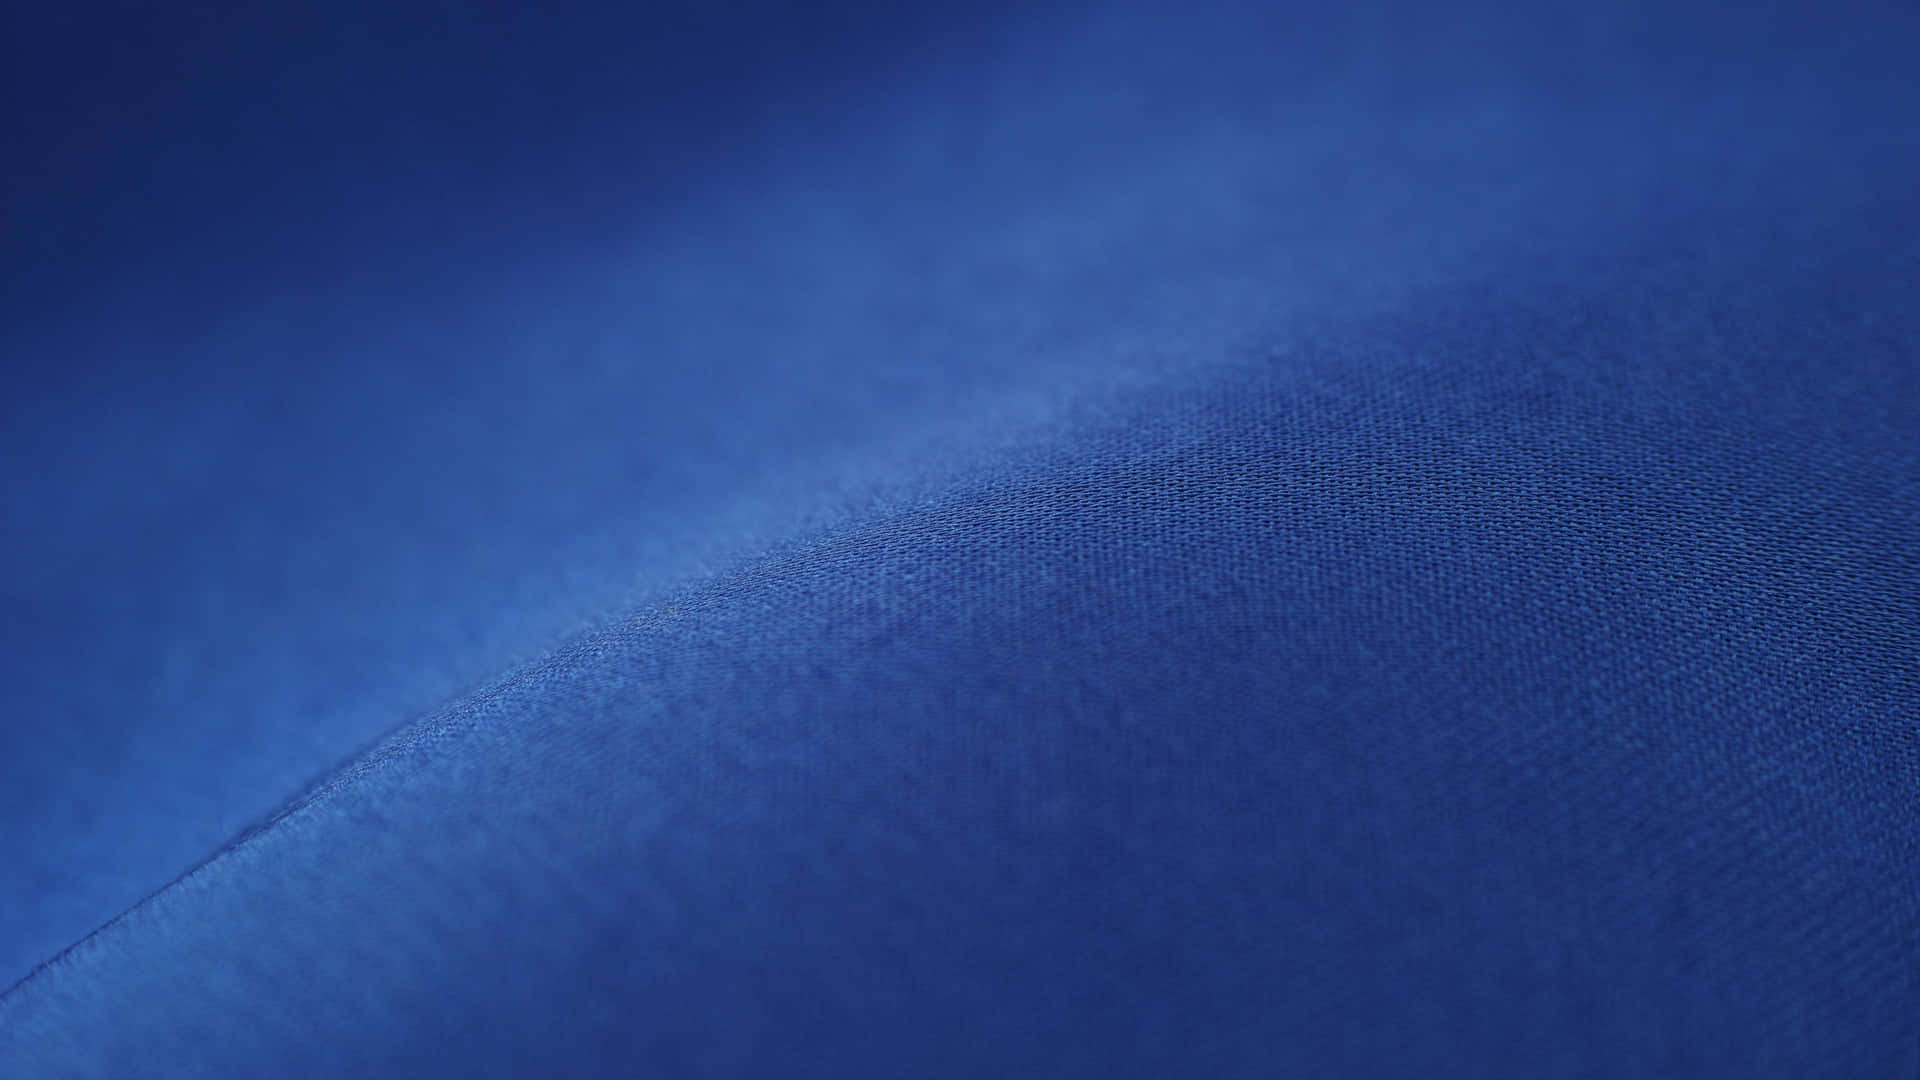 Blue Fabric Texture Picture